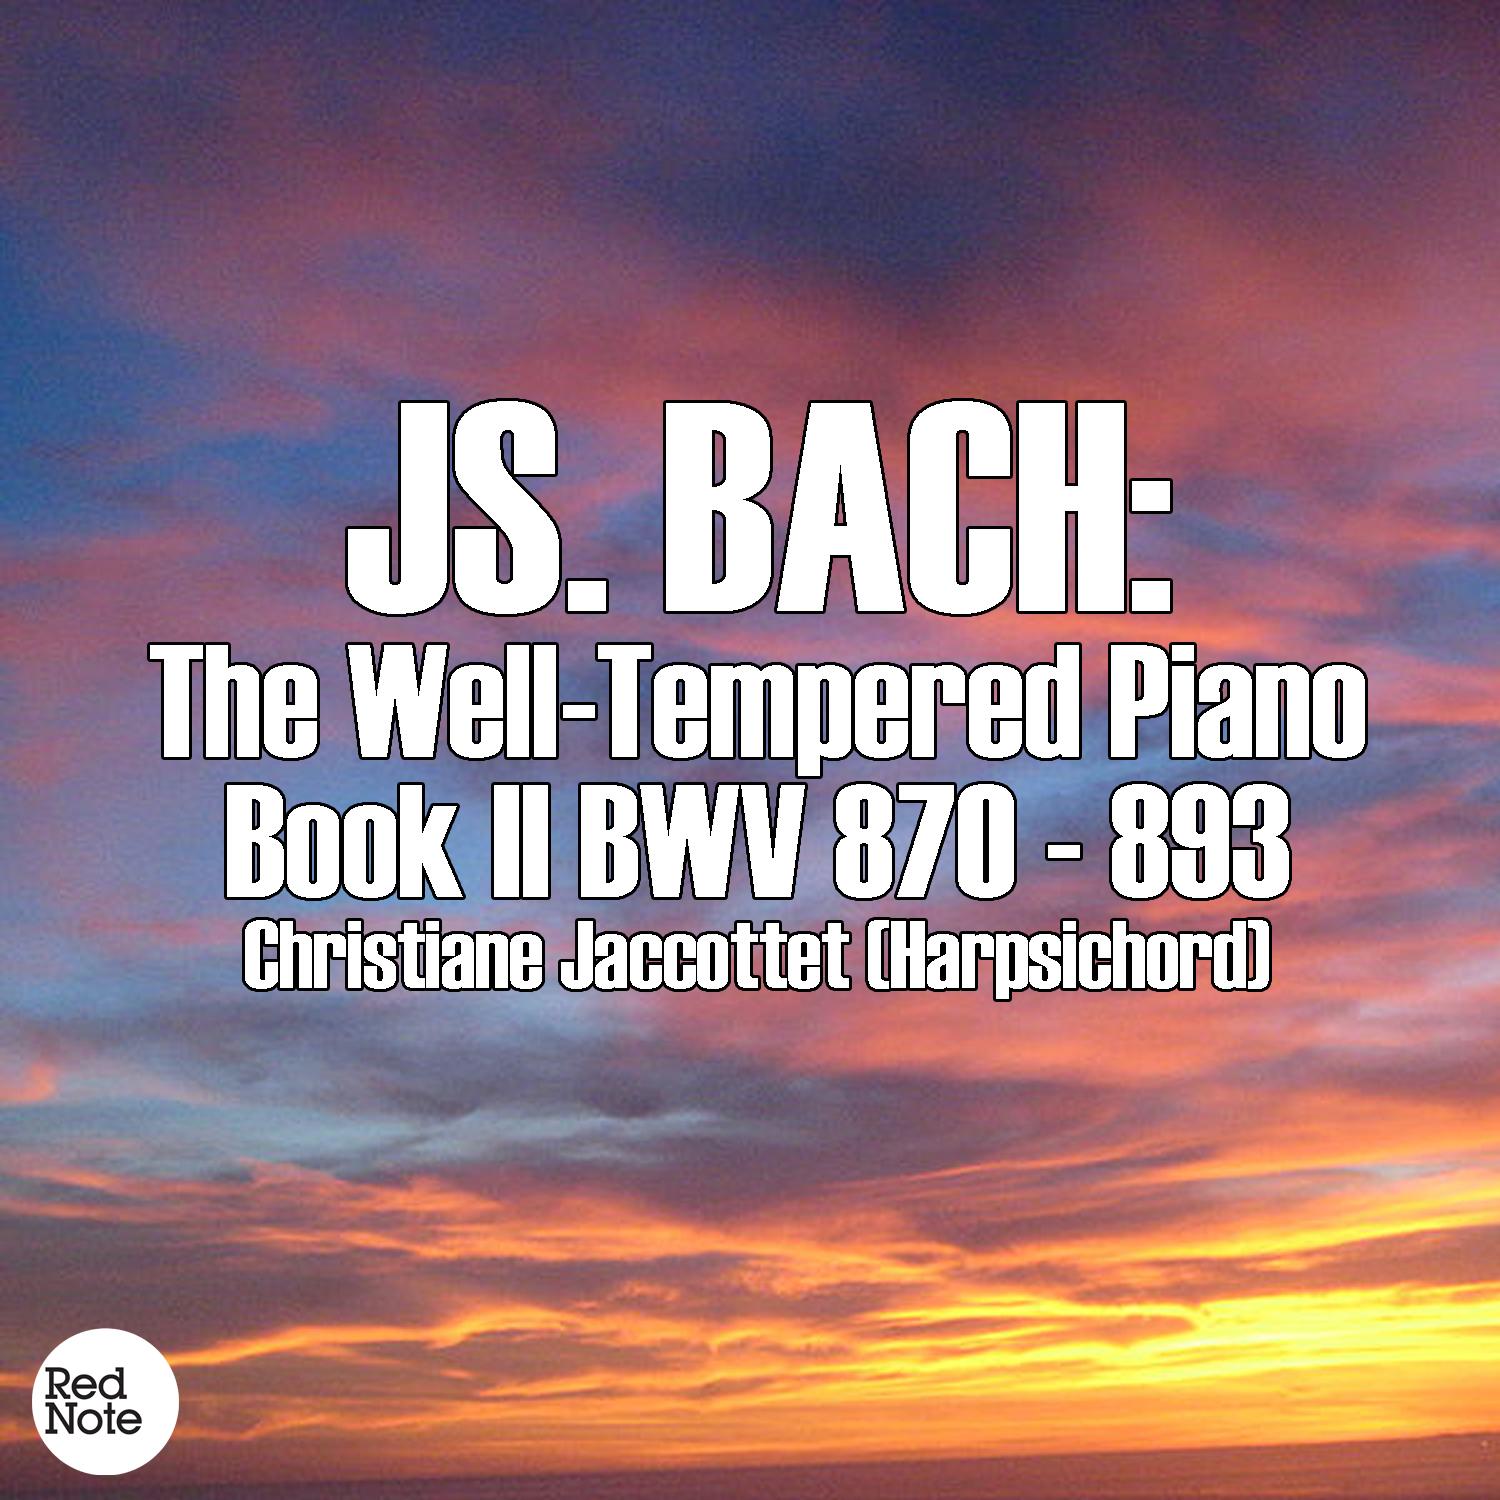 The Well-Tempered Clavier Book 2 in E Minor, BWV 879: Prelude and Fugue No. 10